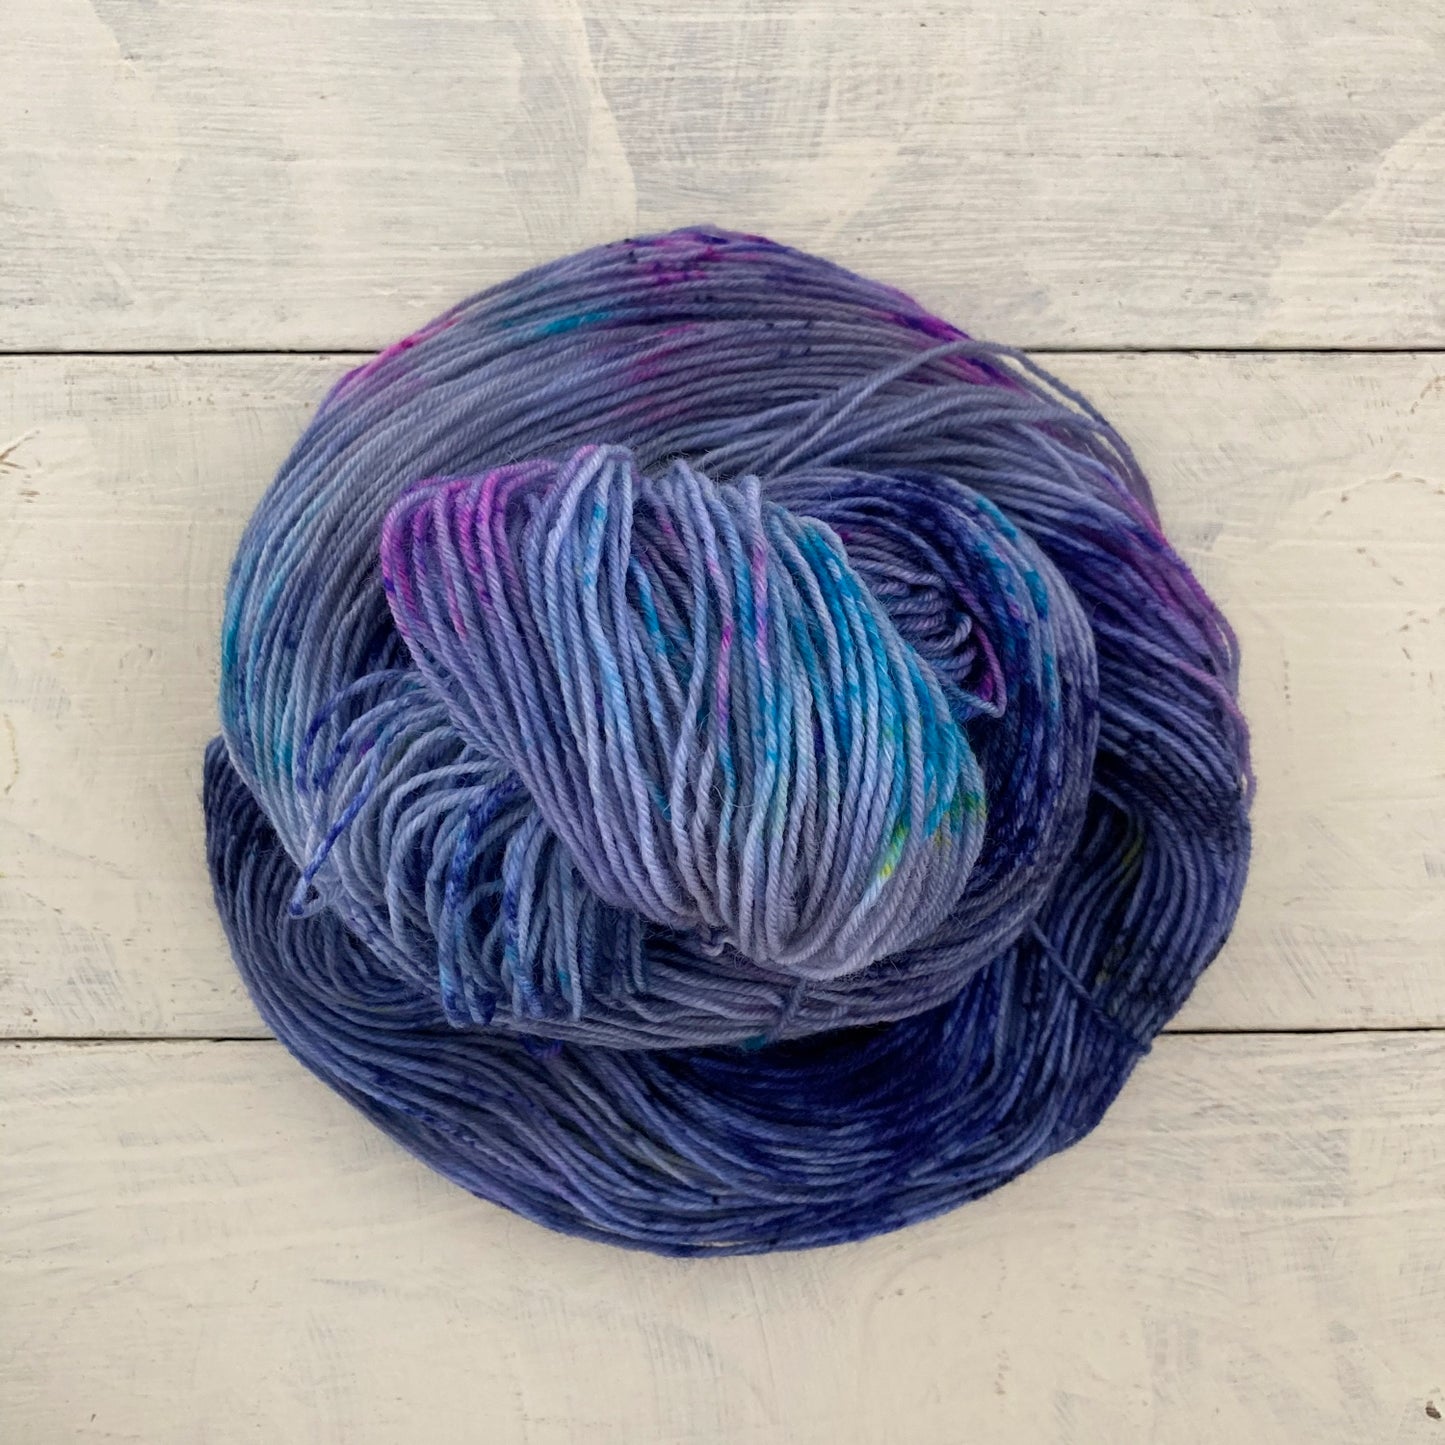 Hand-dyed yarn No.142 sock yarn "Belle nuit, ô nuit d'amour"